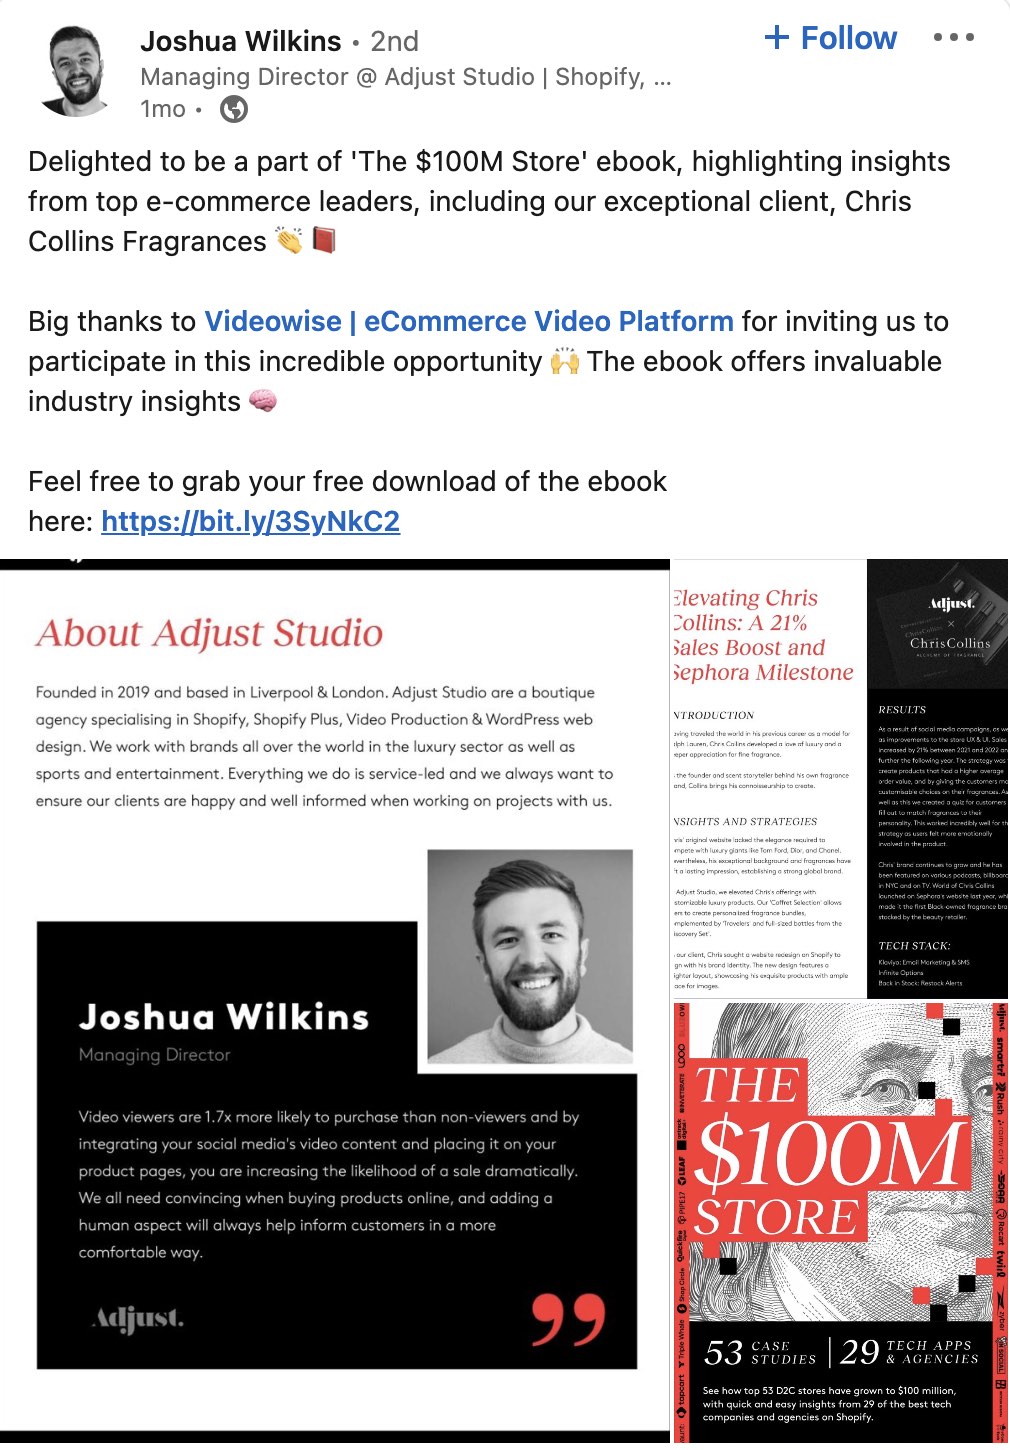 Joushua Wilkins' post on LinkedIn sharing the collaboration with Videowise